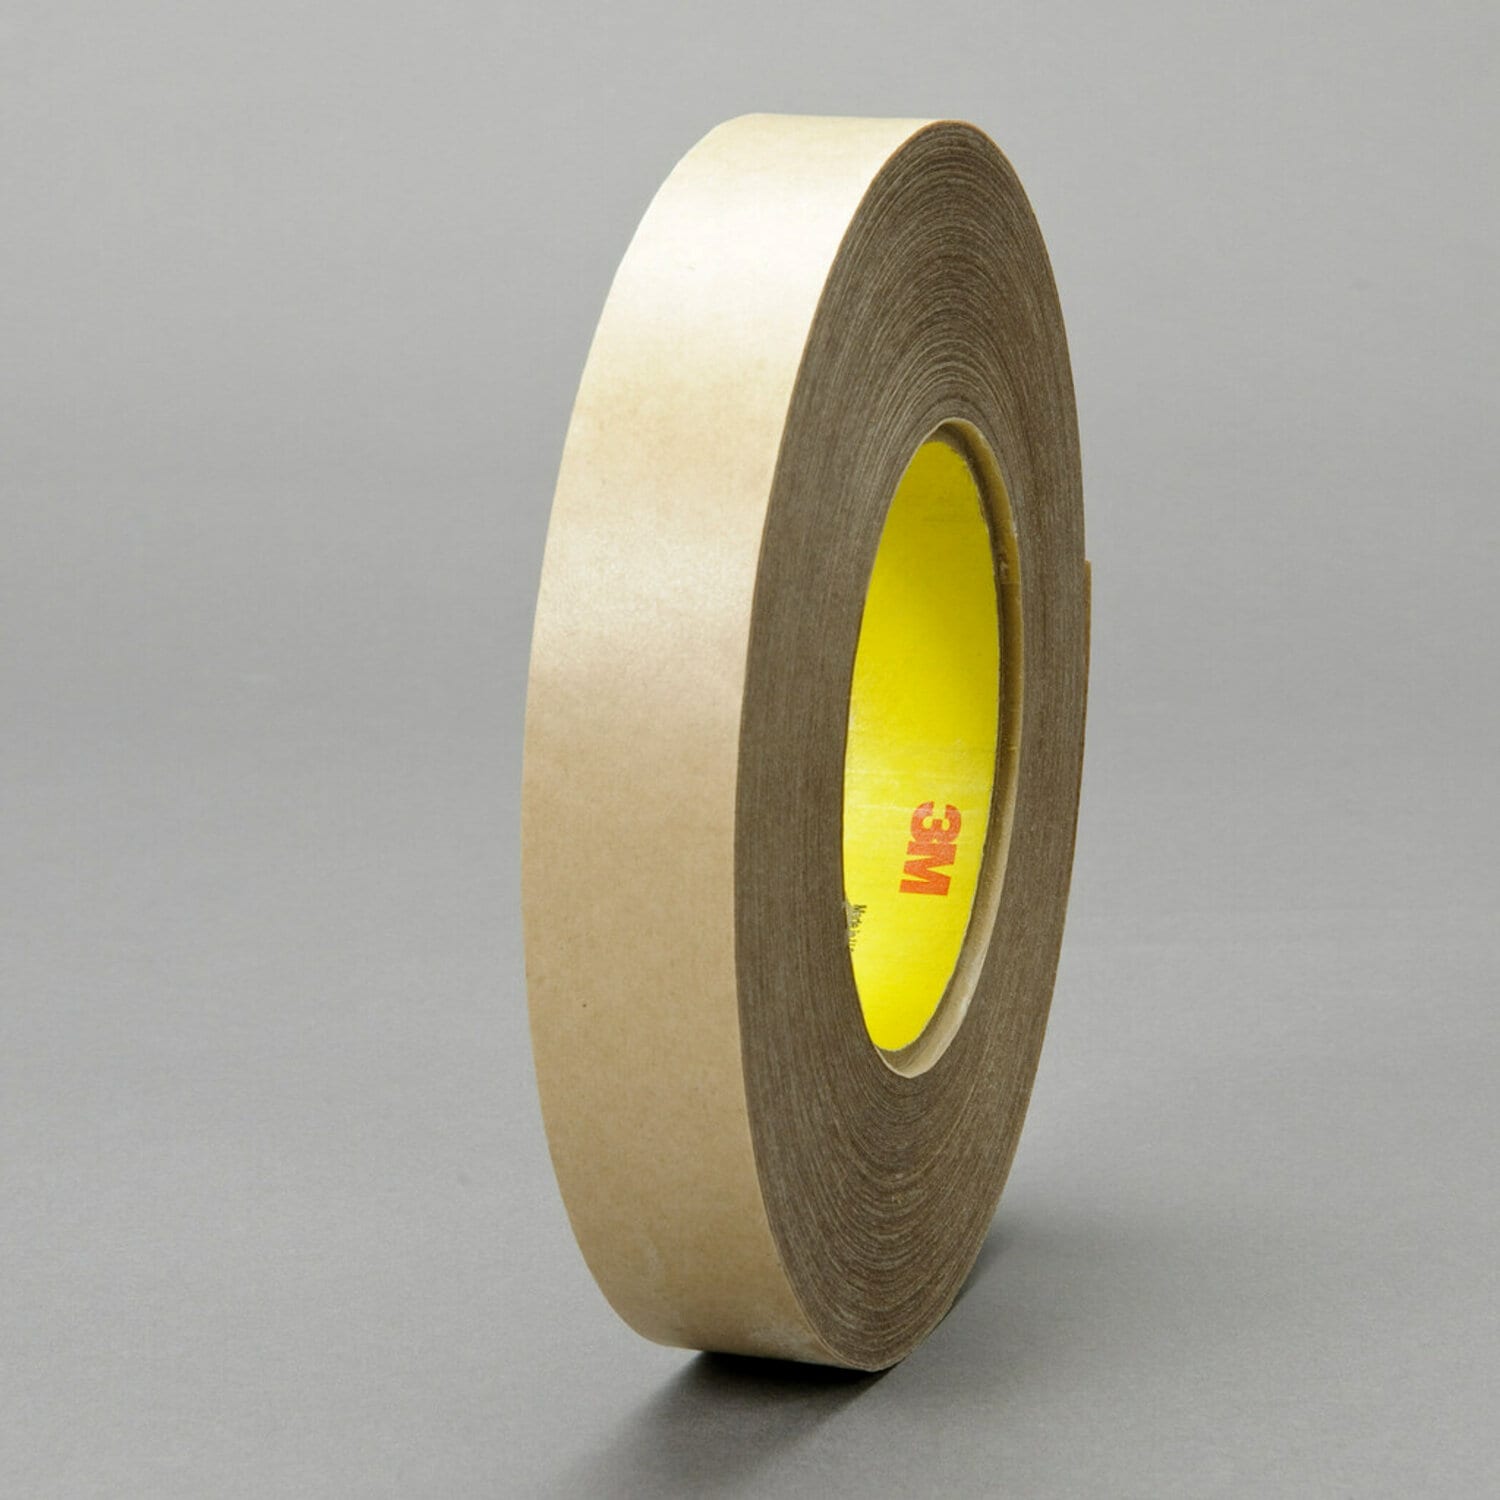 7000123751 - 3M Adhesive Transfer Tape 9485PC, Clear, 48 in x 180 yd, 5 mil, 1 roll
per case